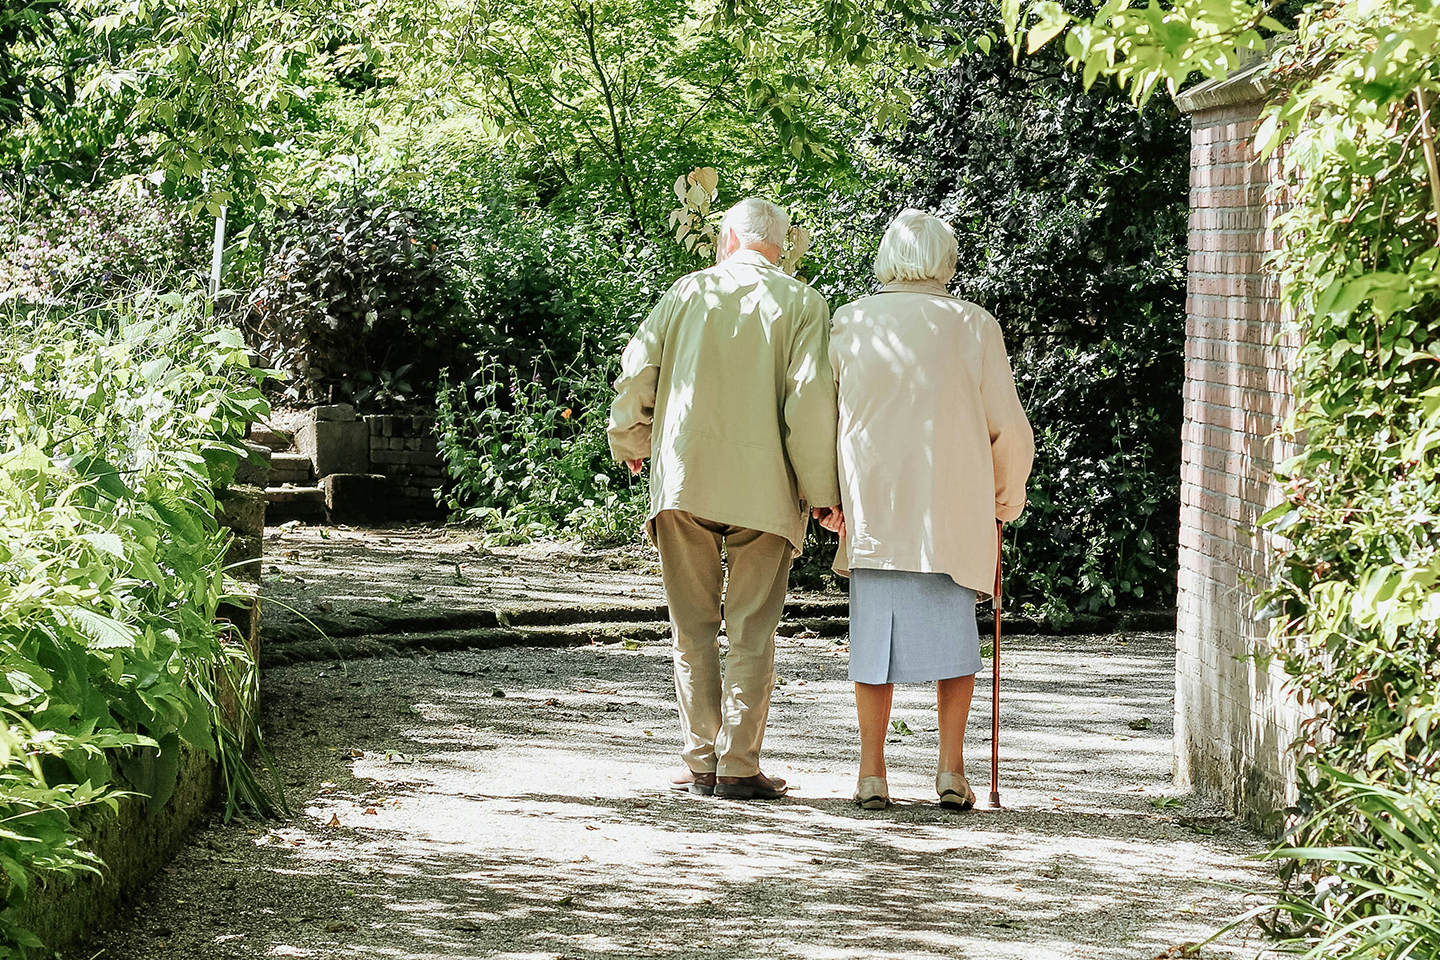 Elderly couple walking hand-in-hand in a leafy footpath. Lessons on immigration compliance for businesses–sponsor licence revoked for care home group